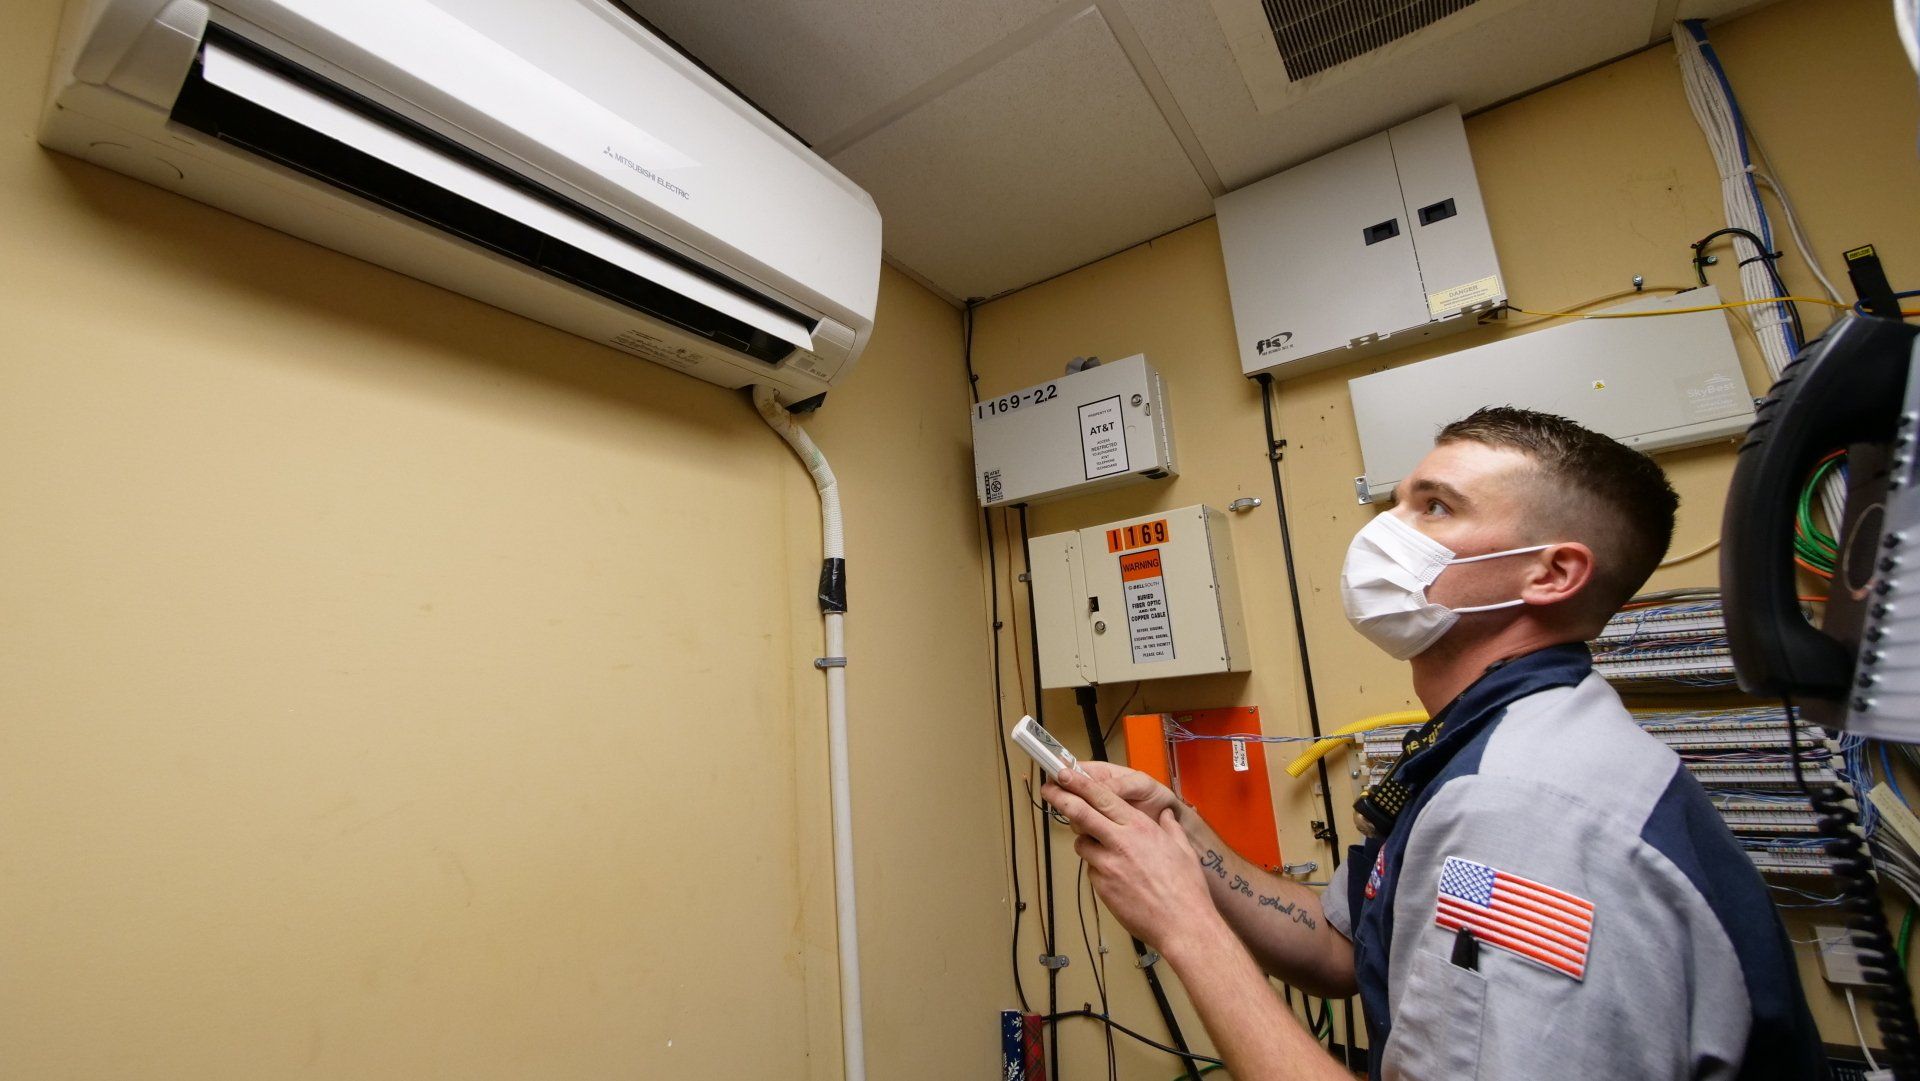 A man wearing a mask is working on an air conditioner in a room.